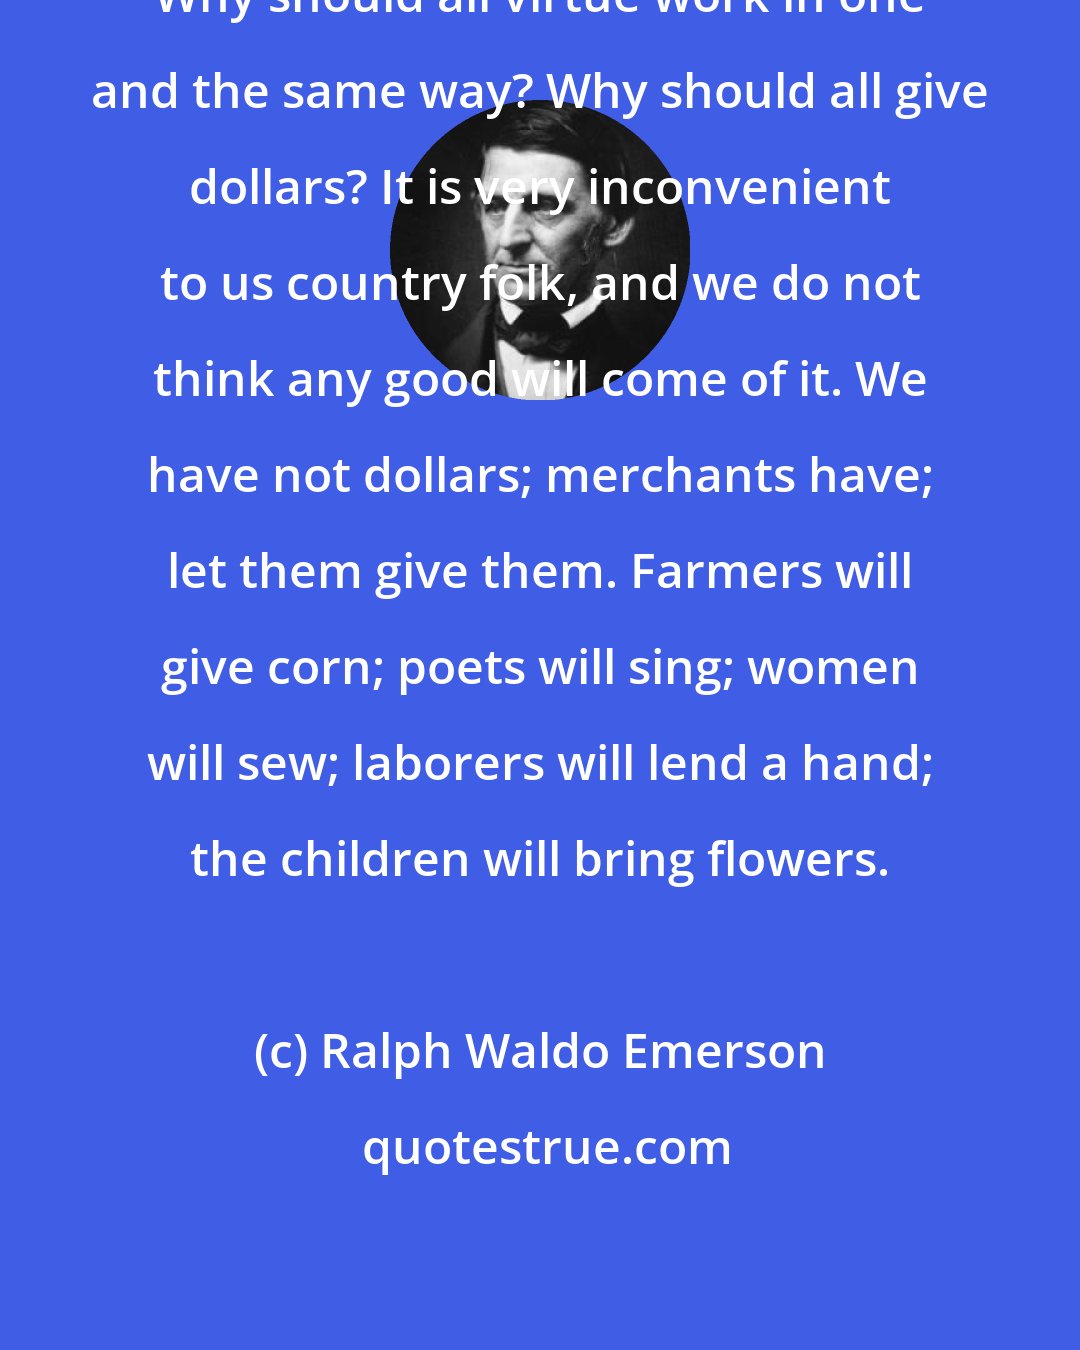 Ralph Waldo Emerson: Why should all virtue work in one and the same way? Why should all give dollars? It is very inconvenient to us country folk, and we do not think any good will come of it. We have not dollars; merchants have; let them give them. Farmers will give corn; poets will sing; women will sew; laborers will lend a hand; the children will bring flowers.